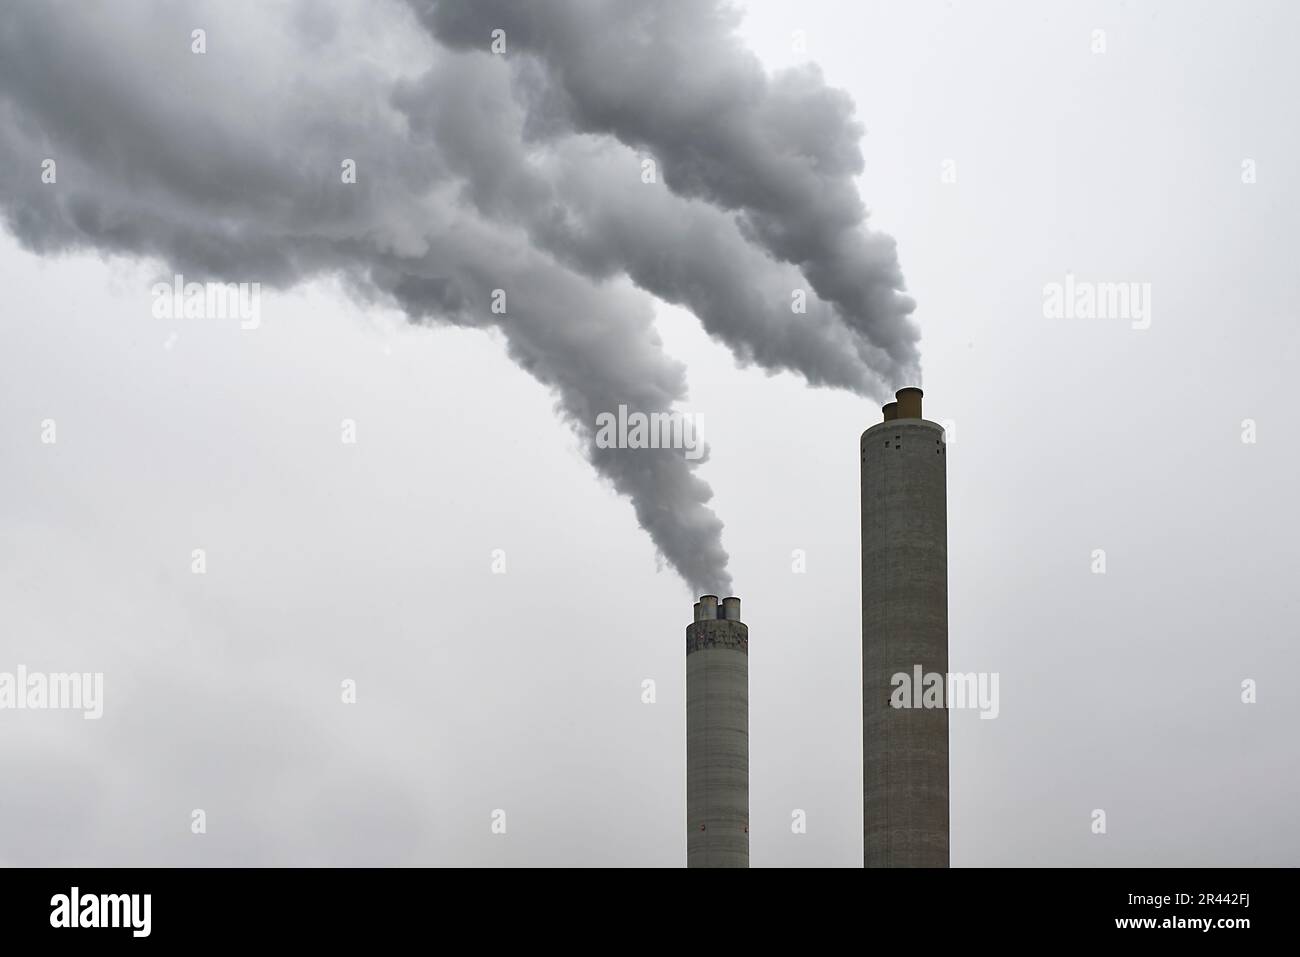 Long exposure of smoke coming out of a factory chimney Stock Photo